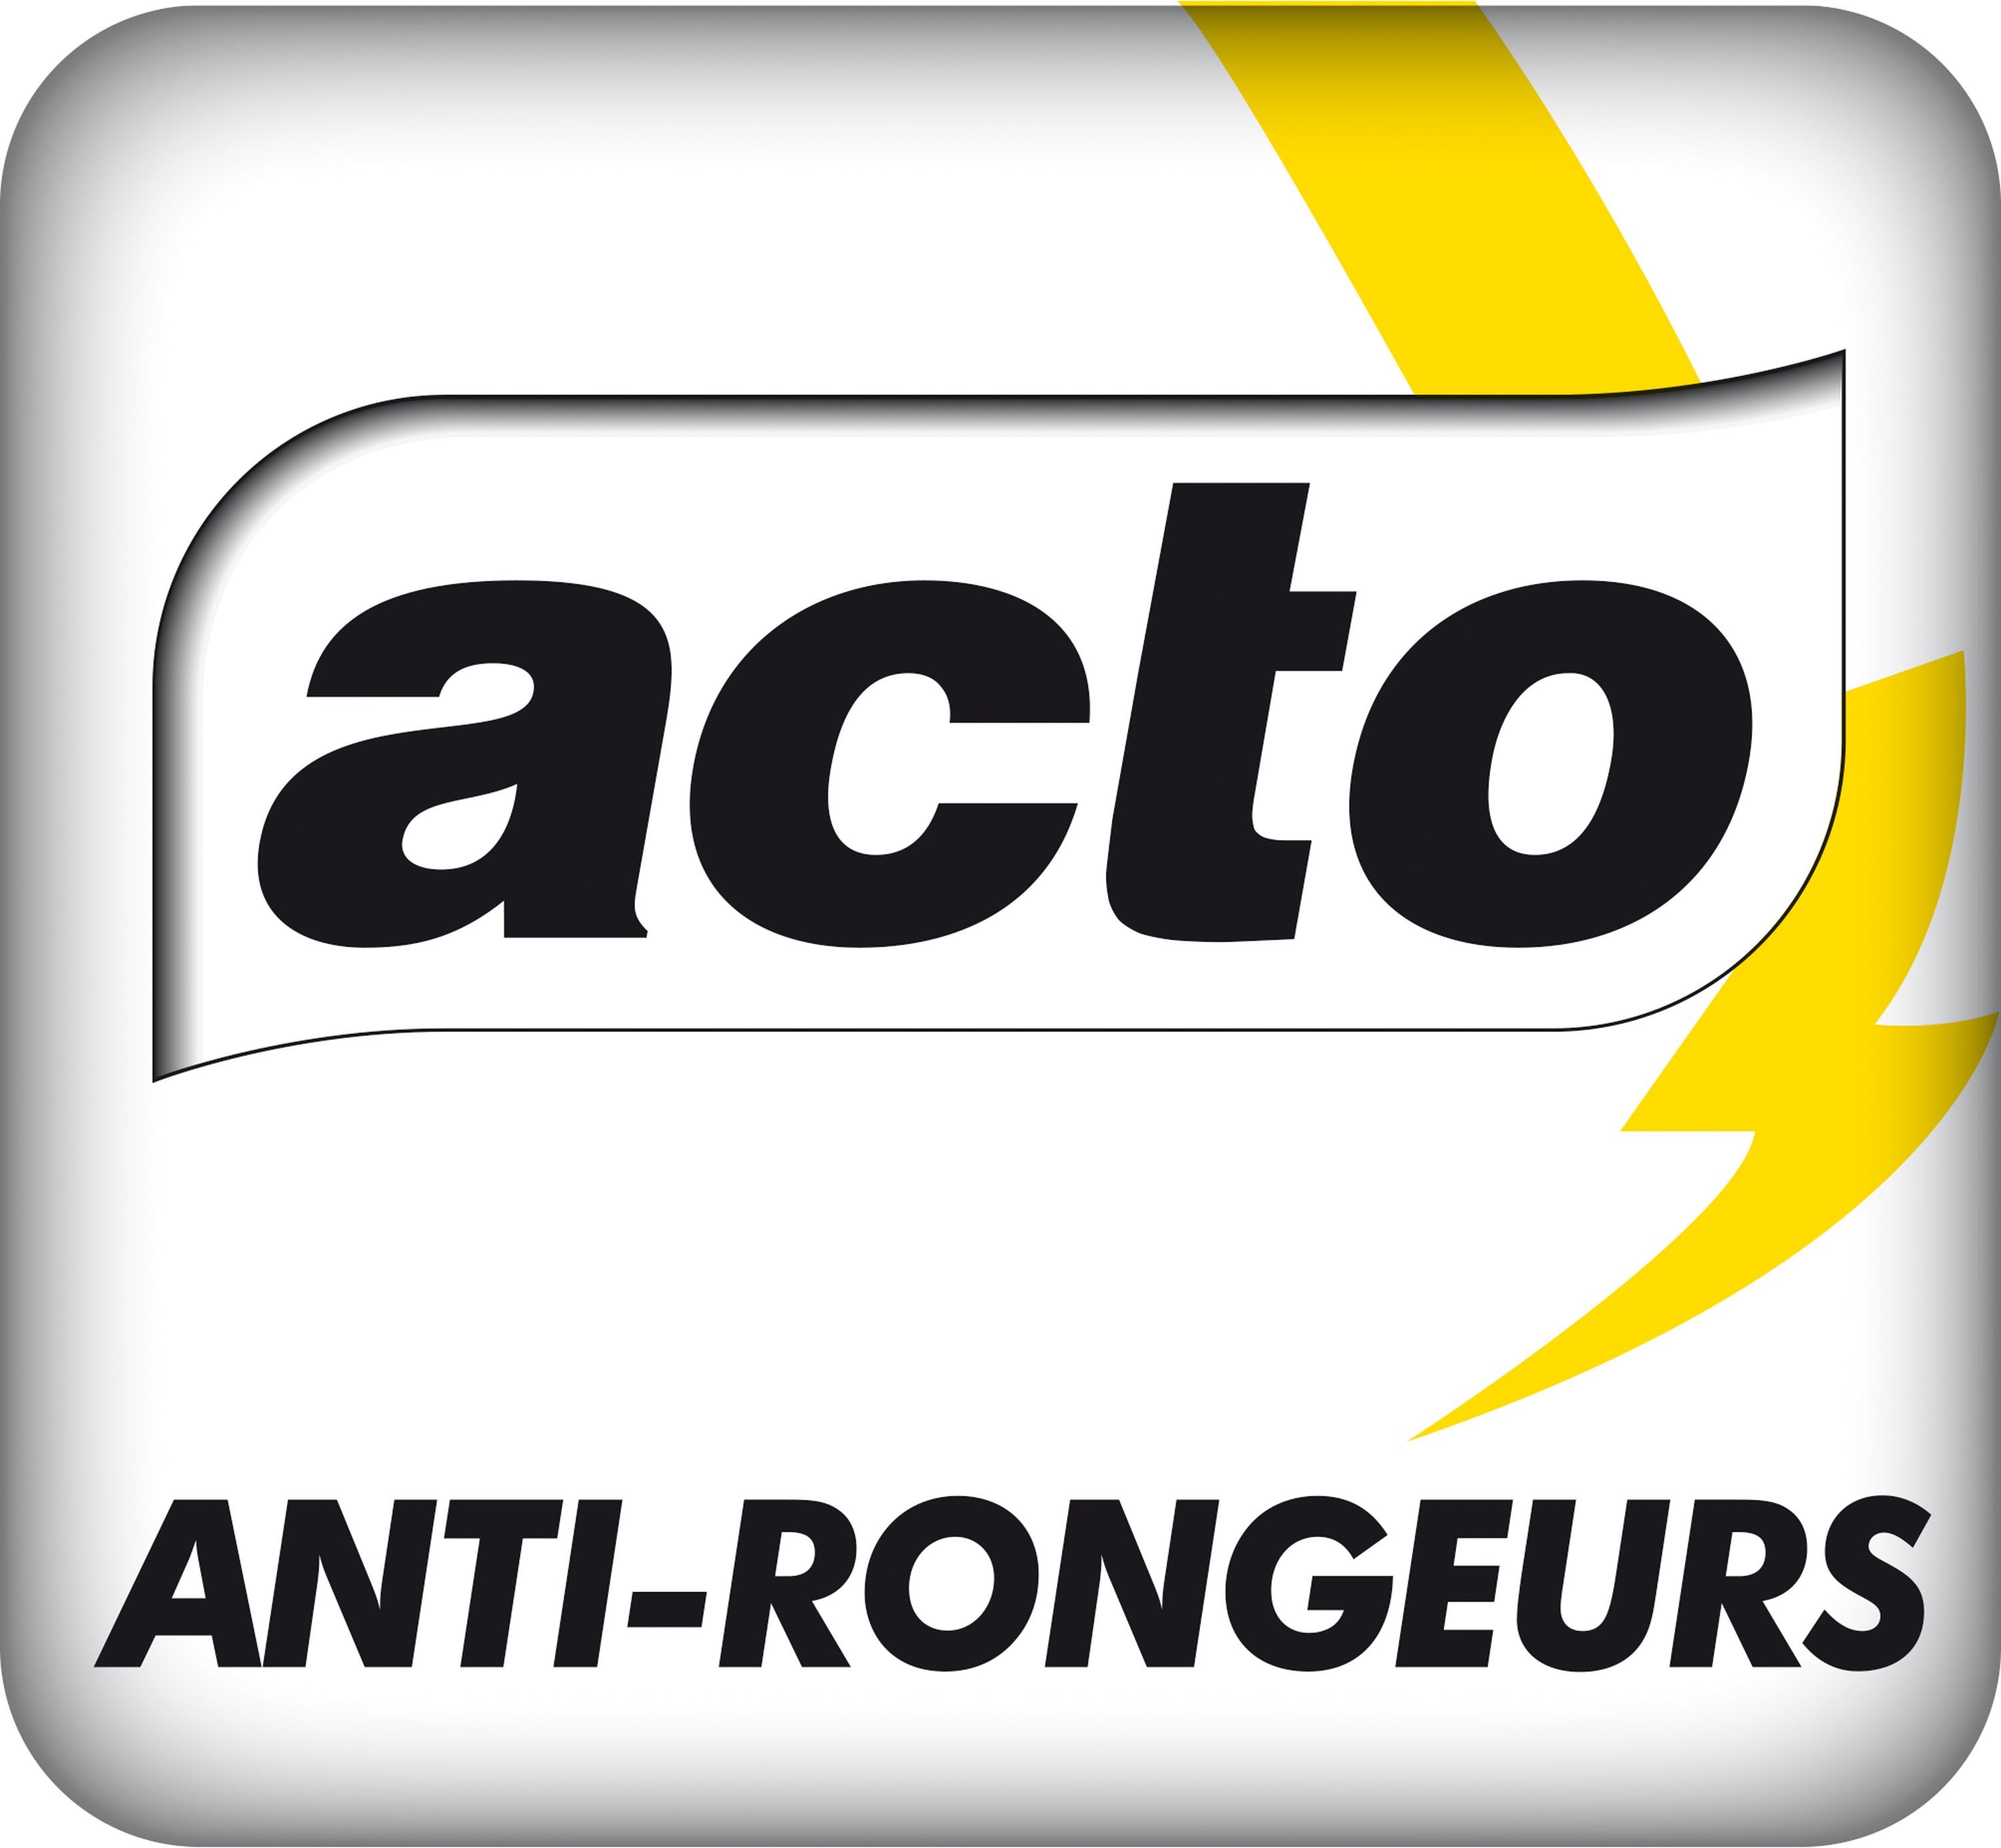 ACTO RONGEURS